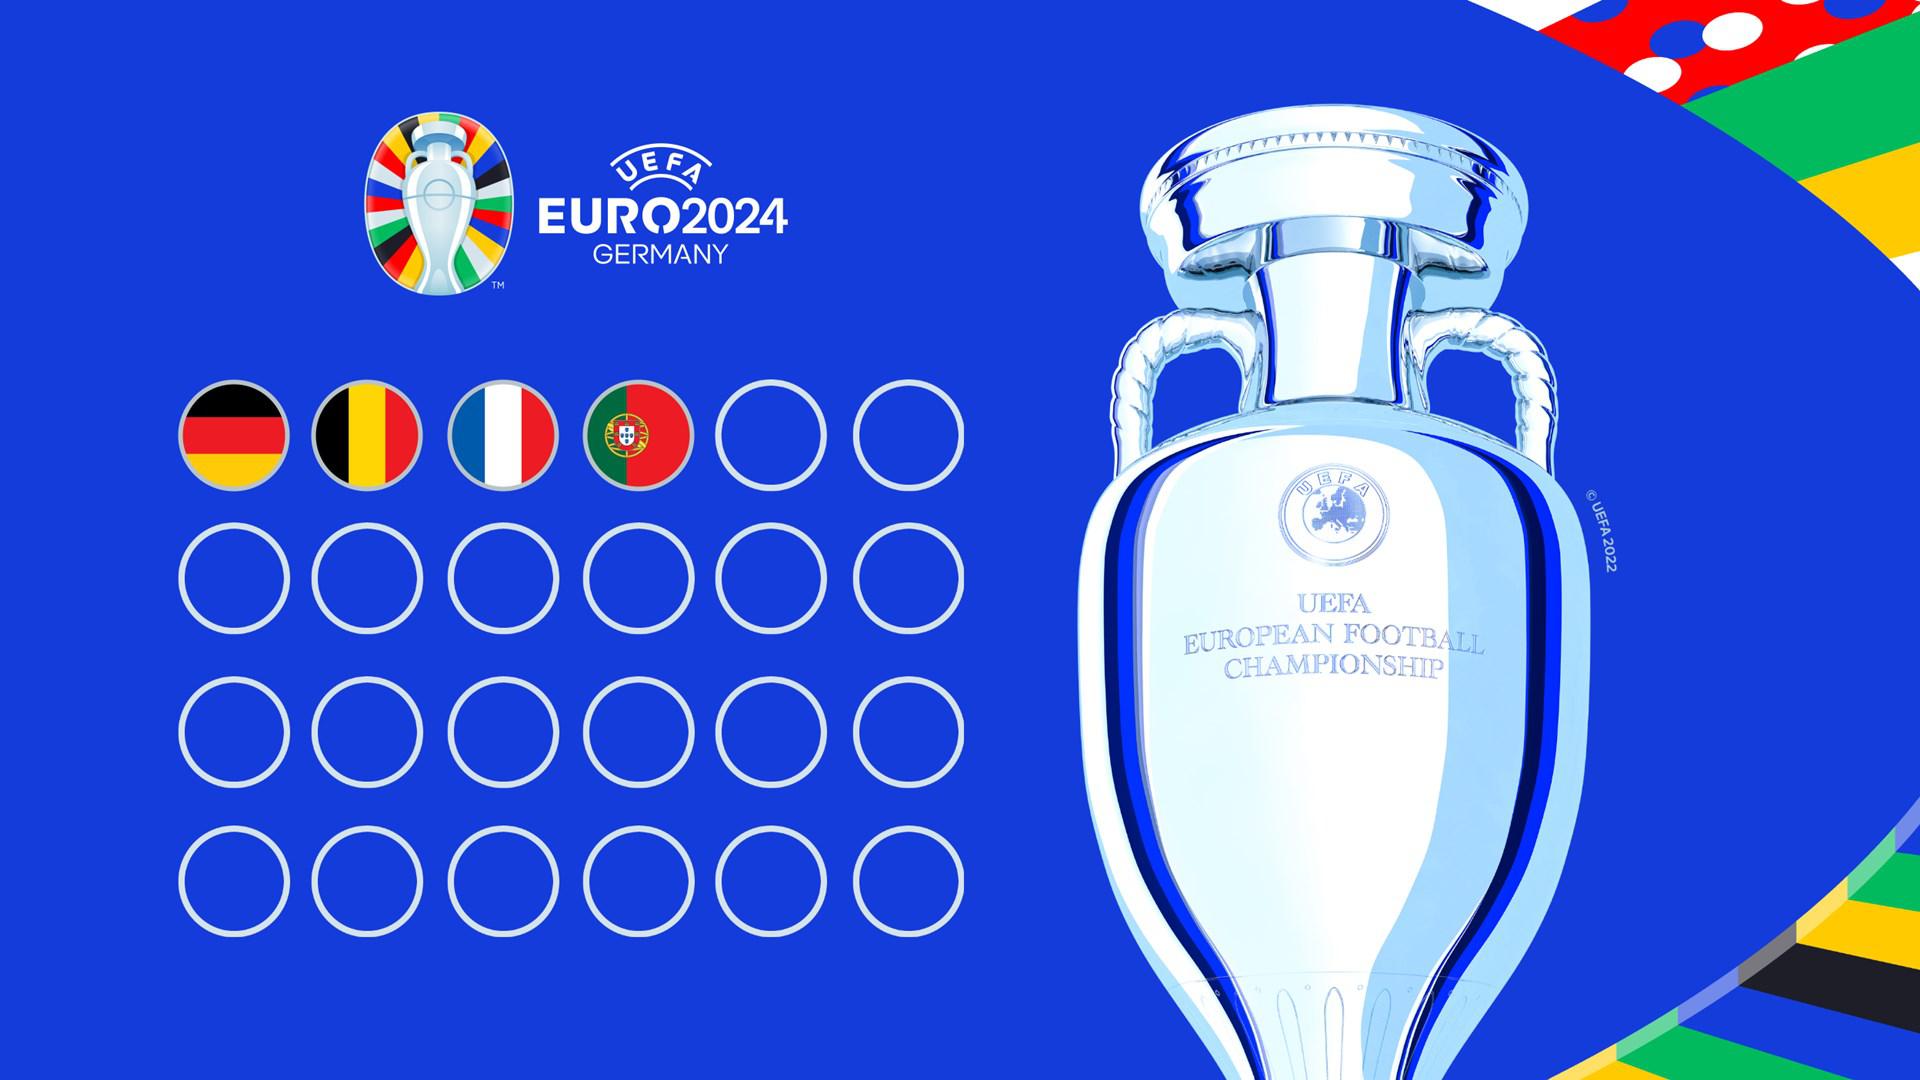 Who has qualified for UEFA EURO 2024?